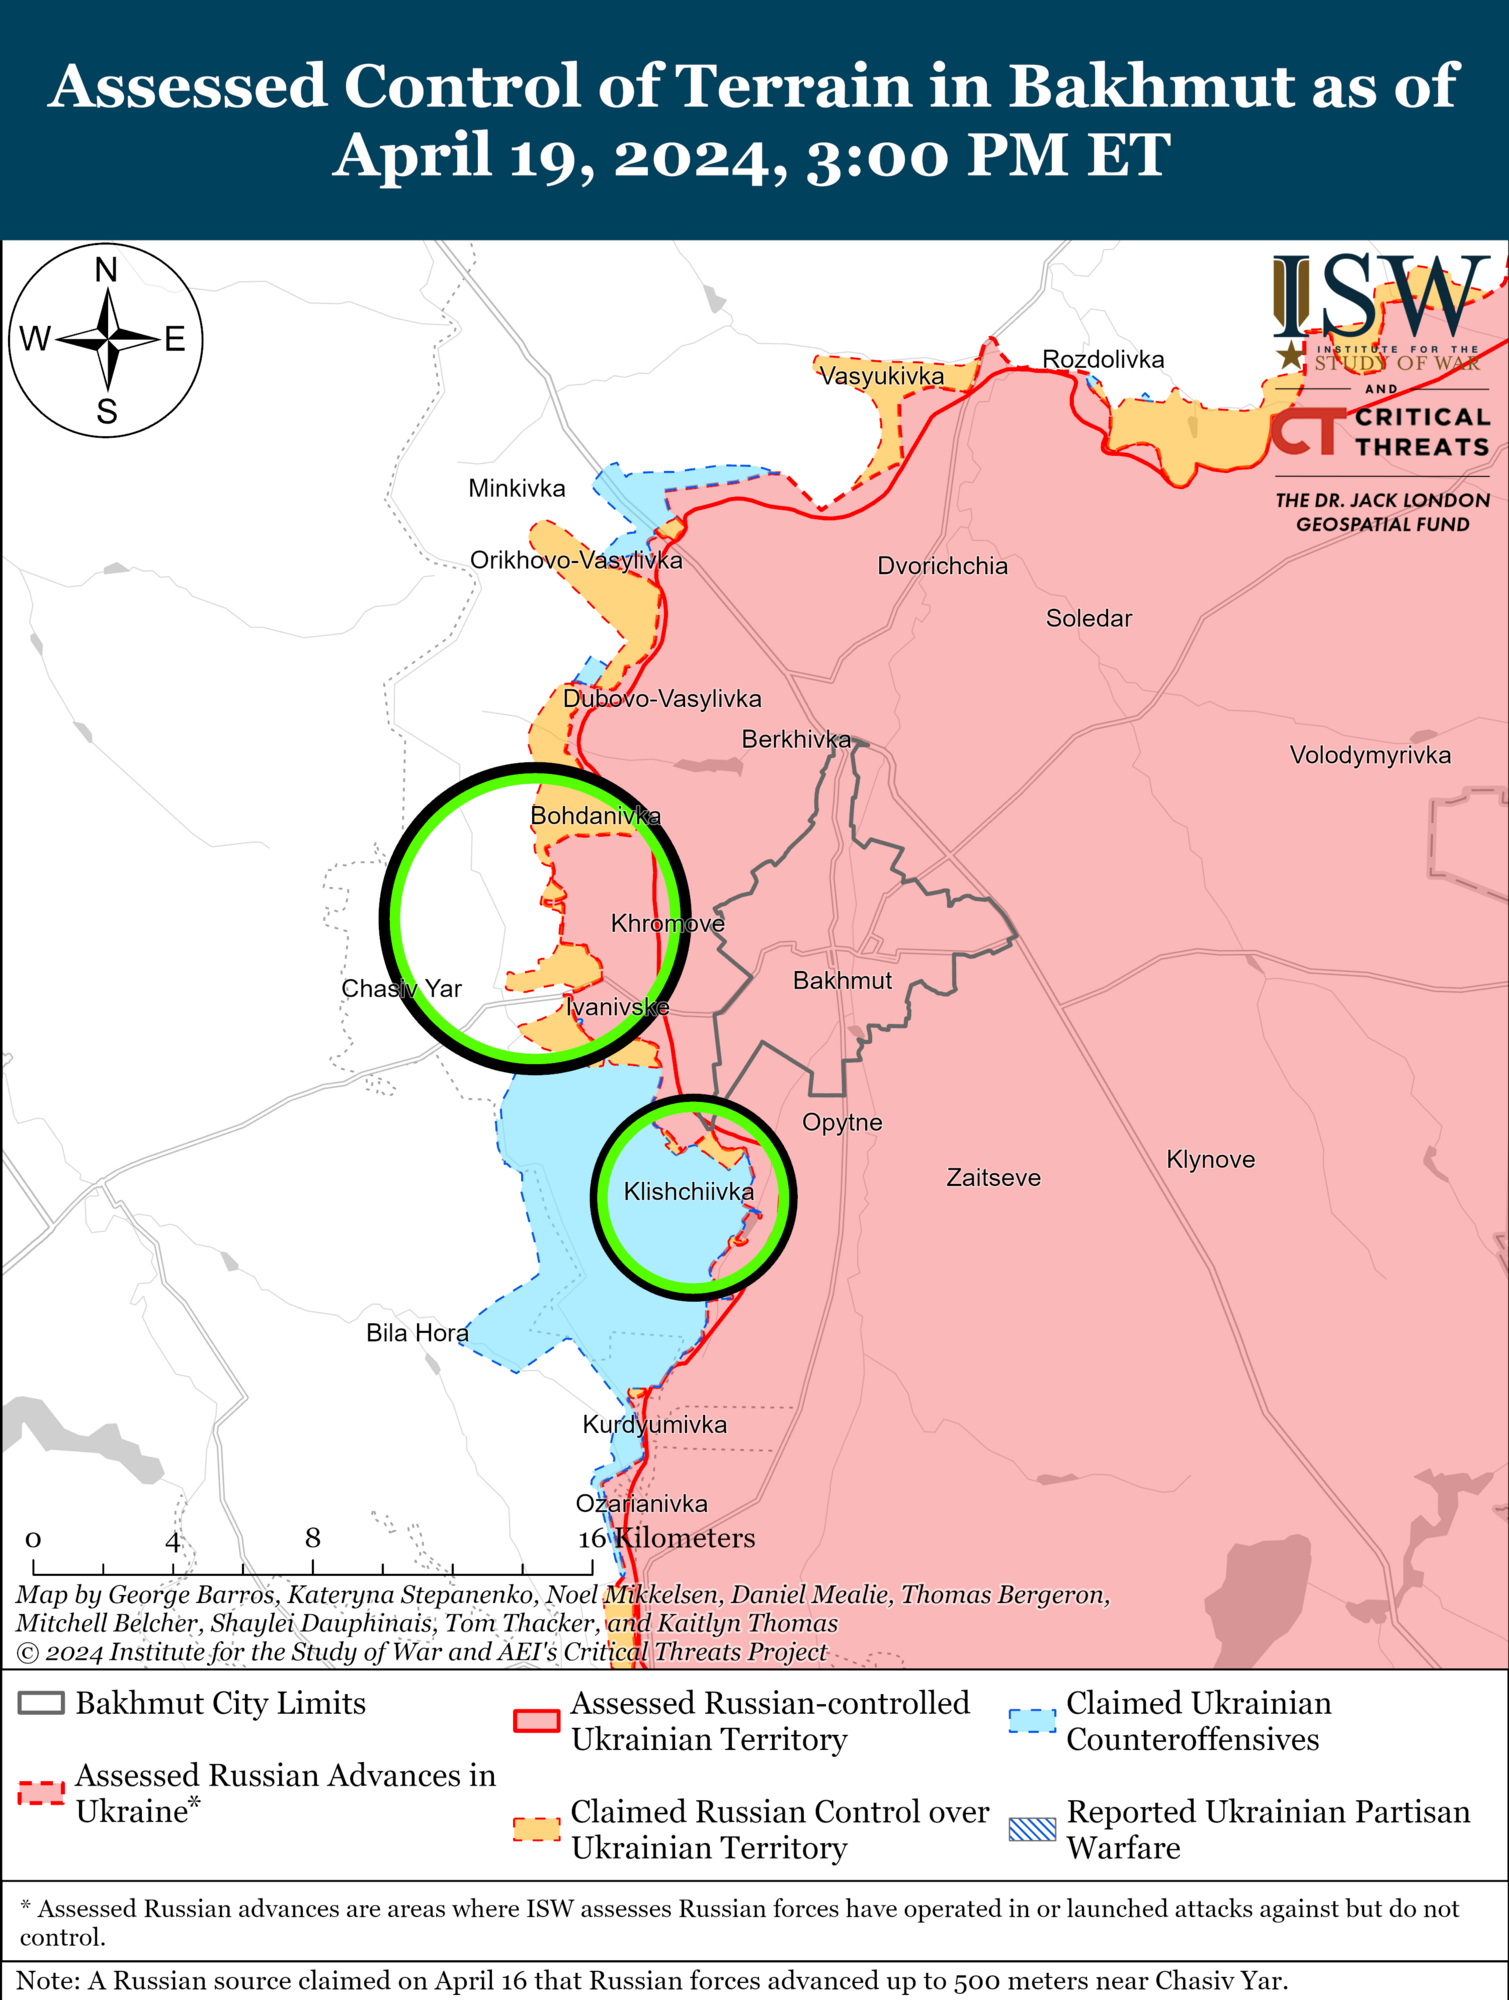 Lack of air defense systems in Ukraine allows the occupiers to advance rapidly in Chasiv Yar area - ISW